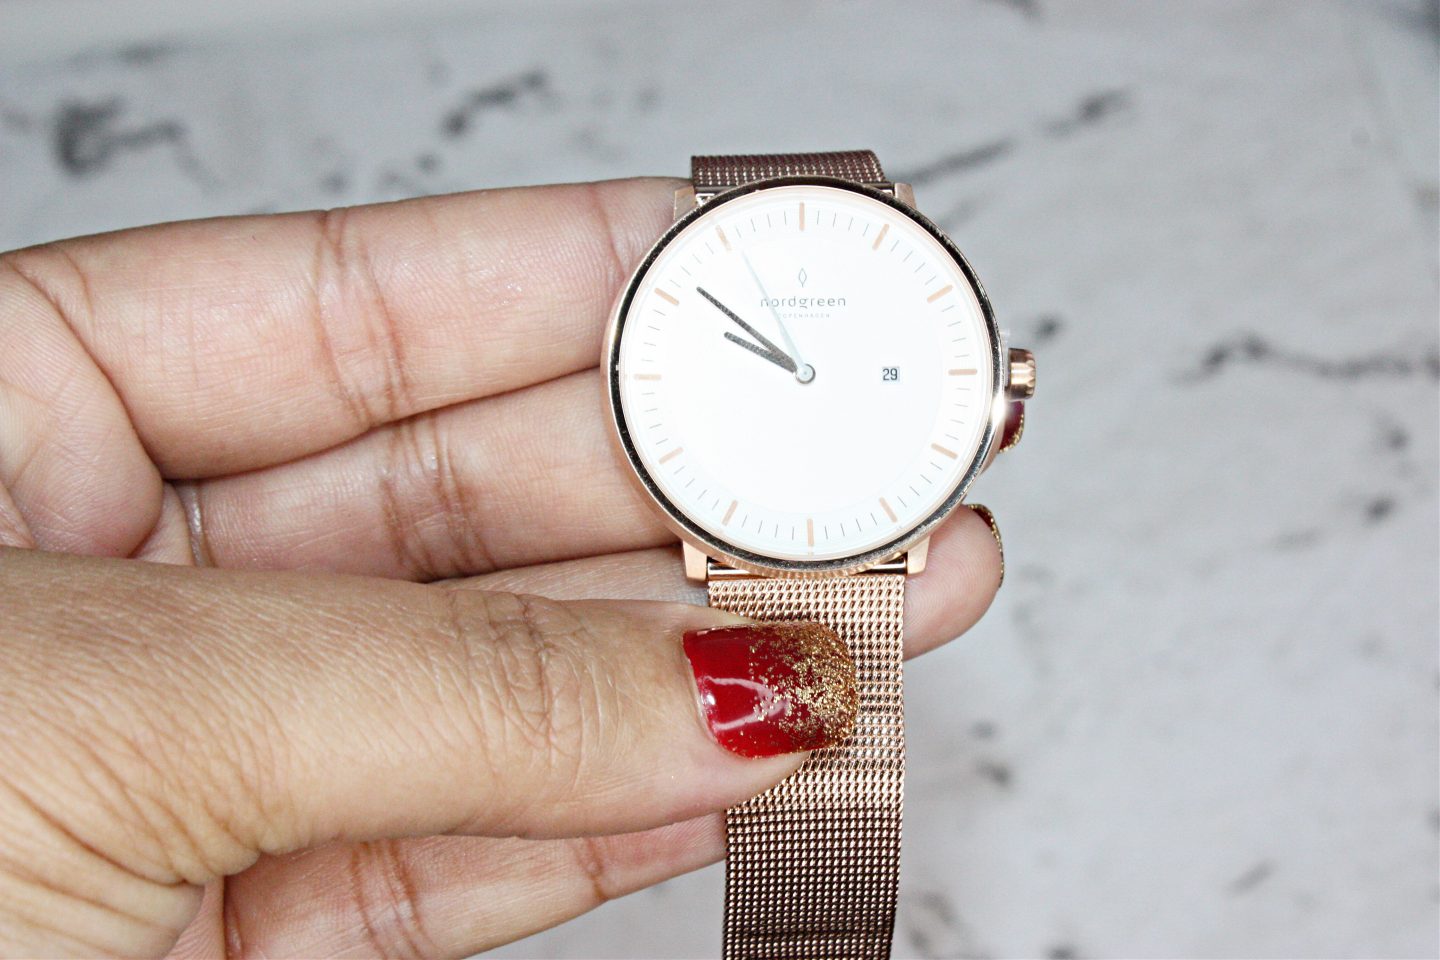 Nordgreen Philosopher Rose Gold Watch Review - Just Brennon Blog